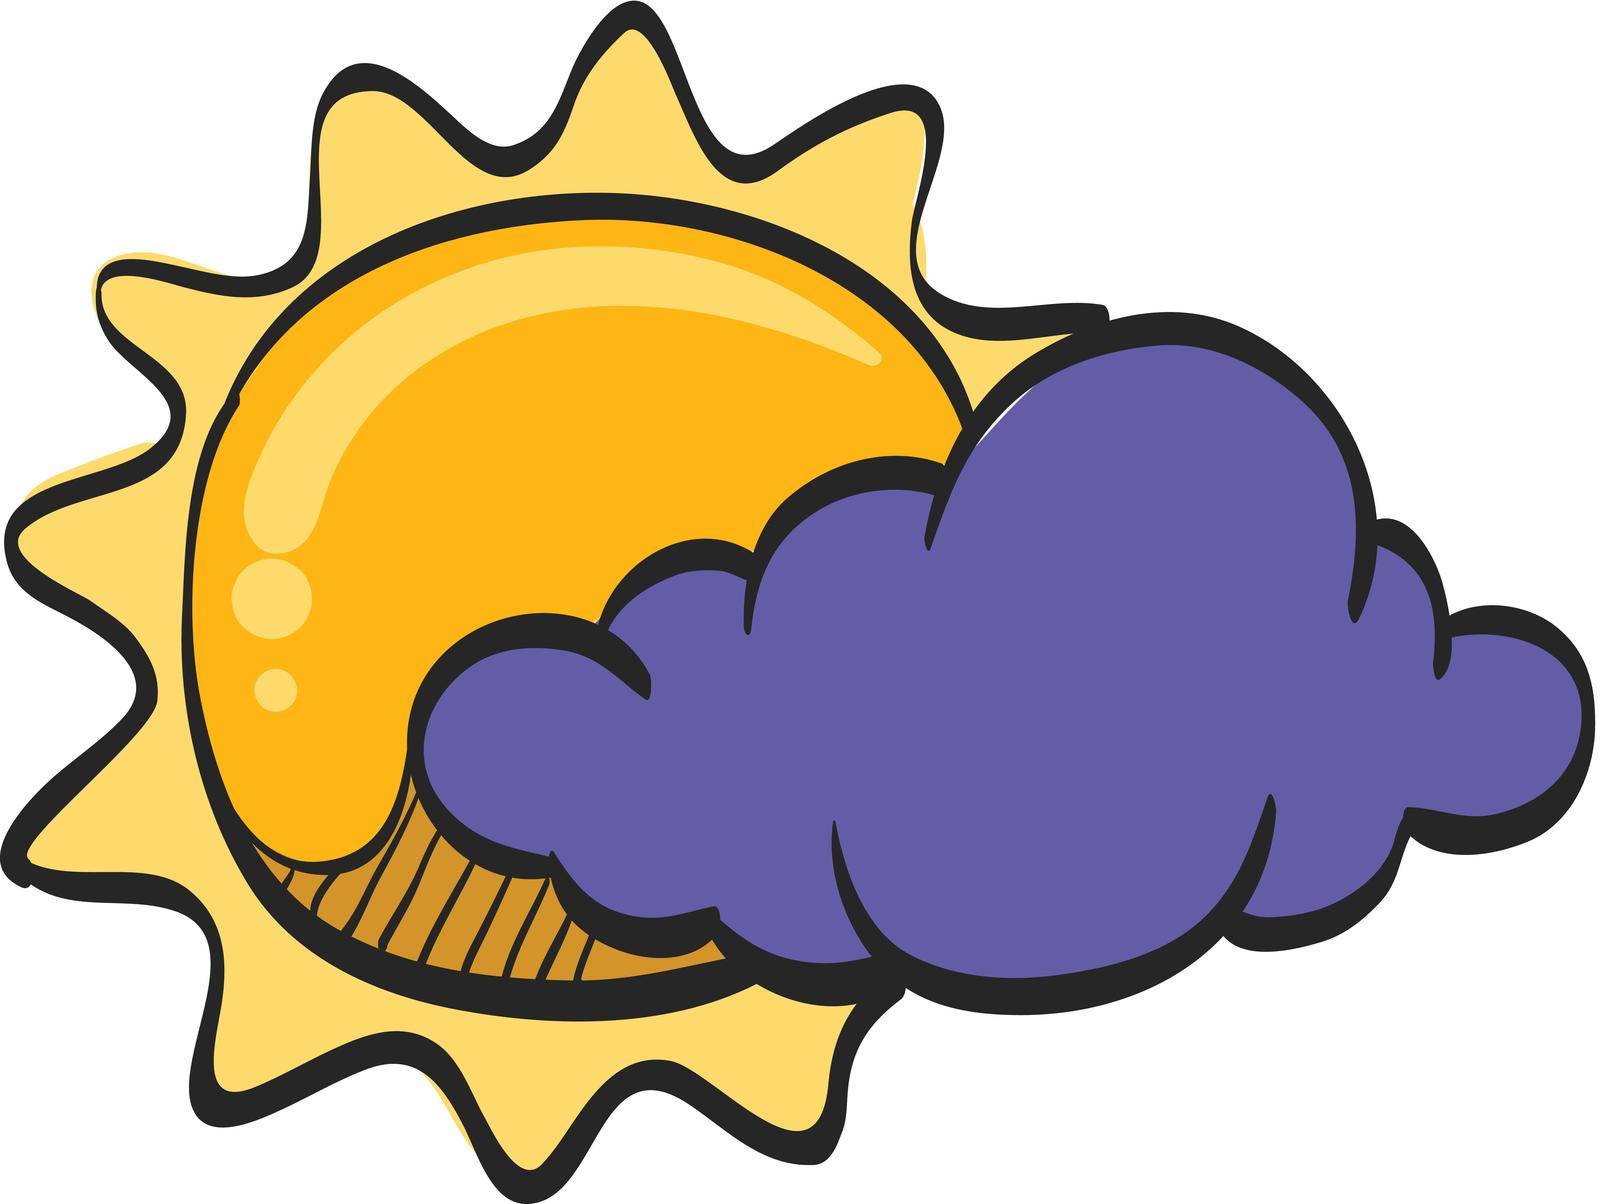 Weather forecast partly cloudy icon in color drawing. Meteorology overcast by puruan